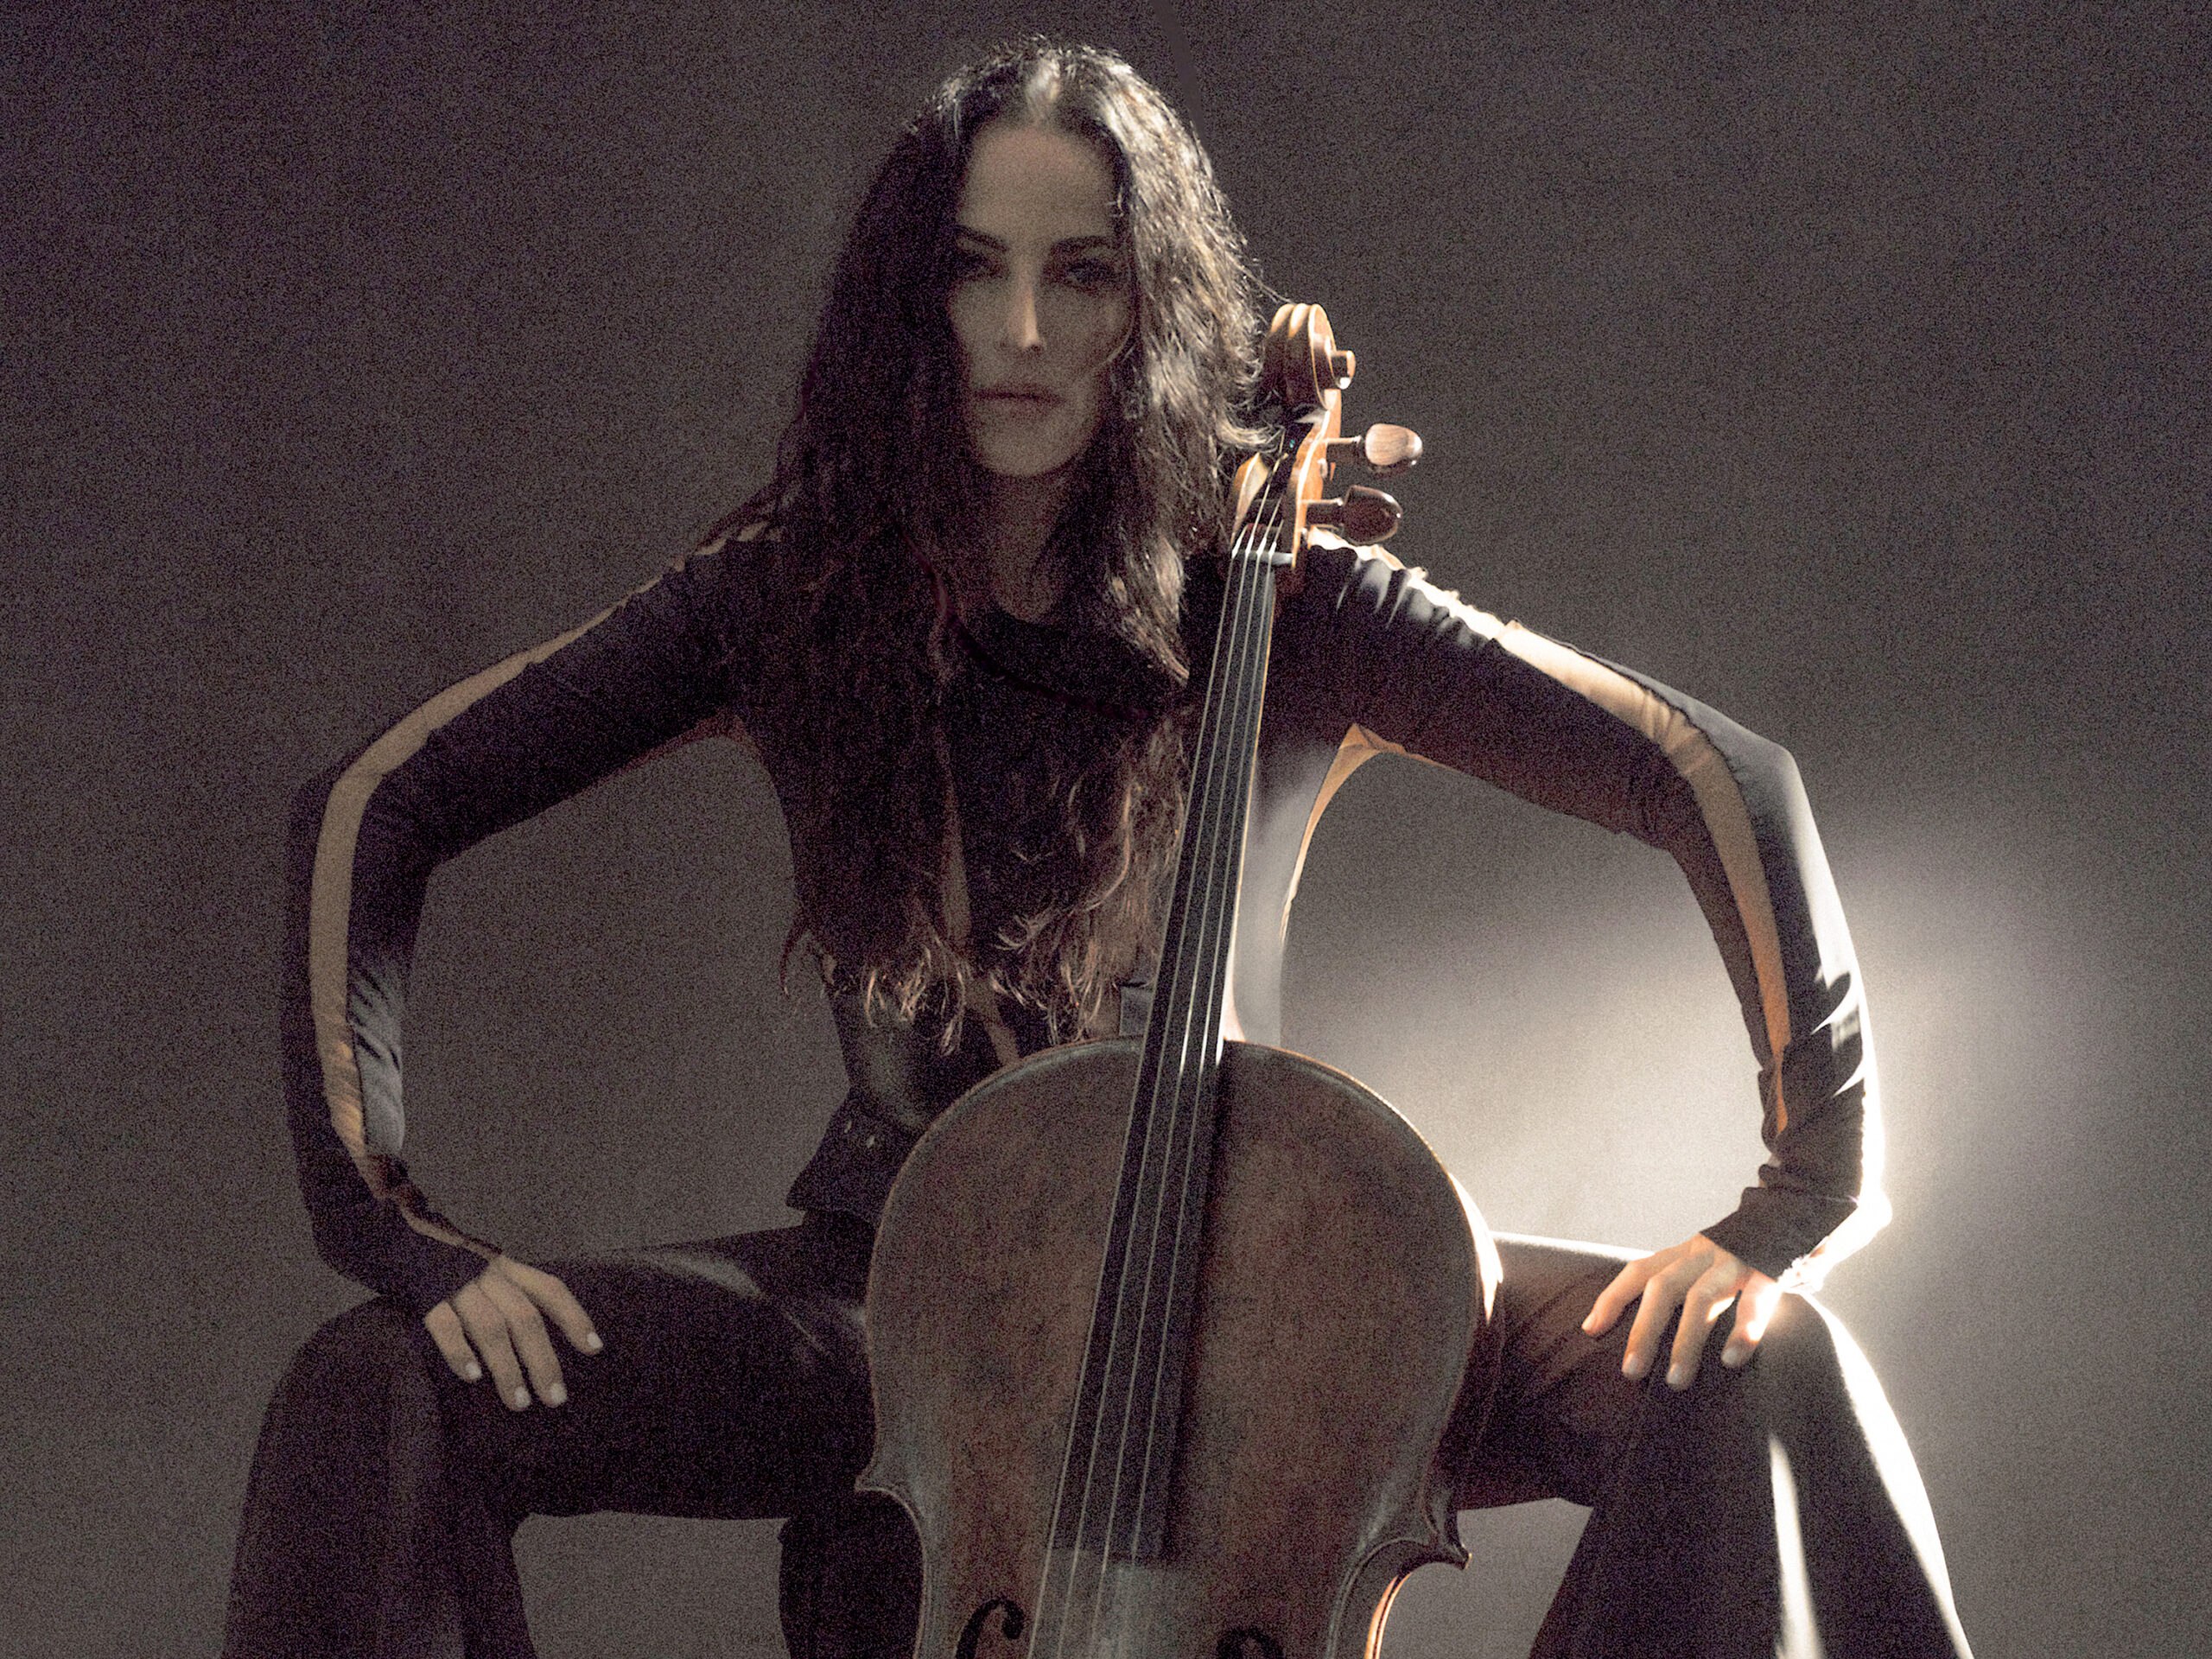 Cellist Maya Beiser has reimagined Terry Riley's pioneering work In C, which helped launch the style of music called minimalism.